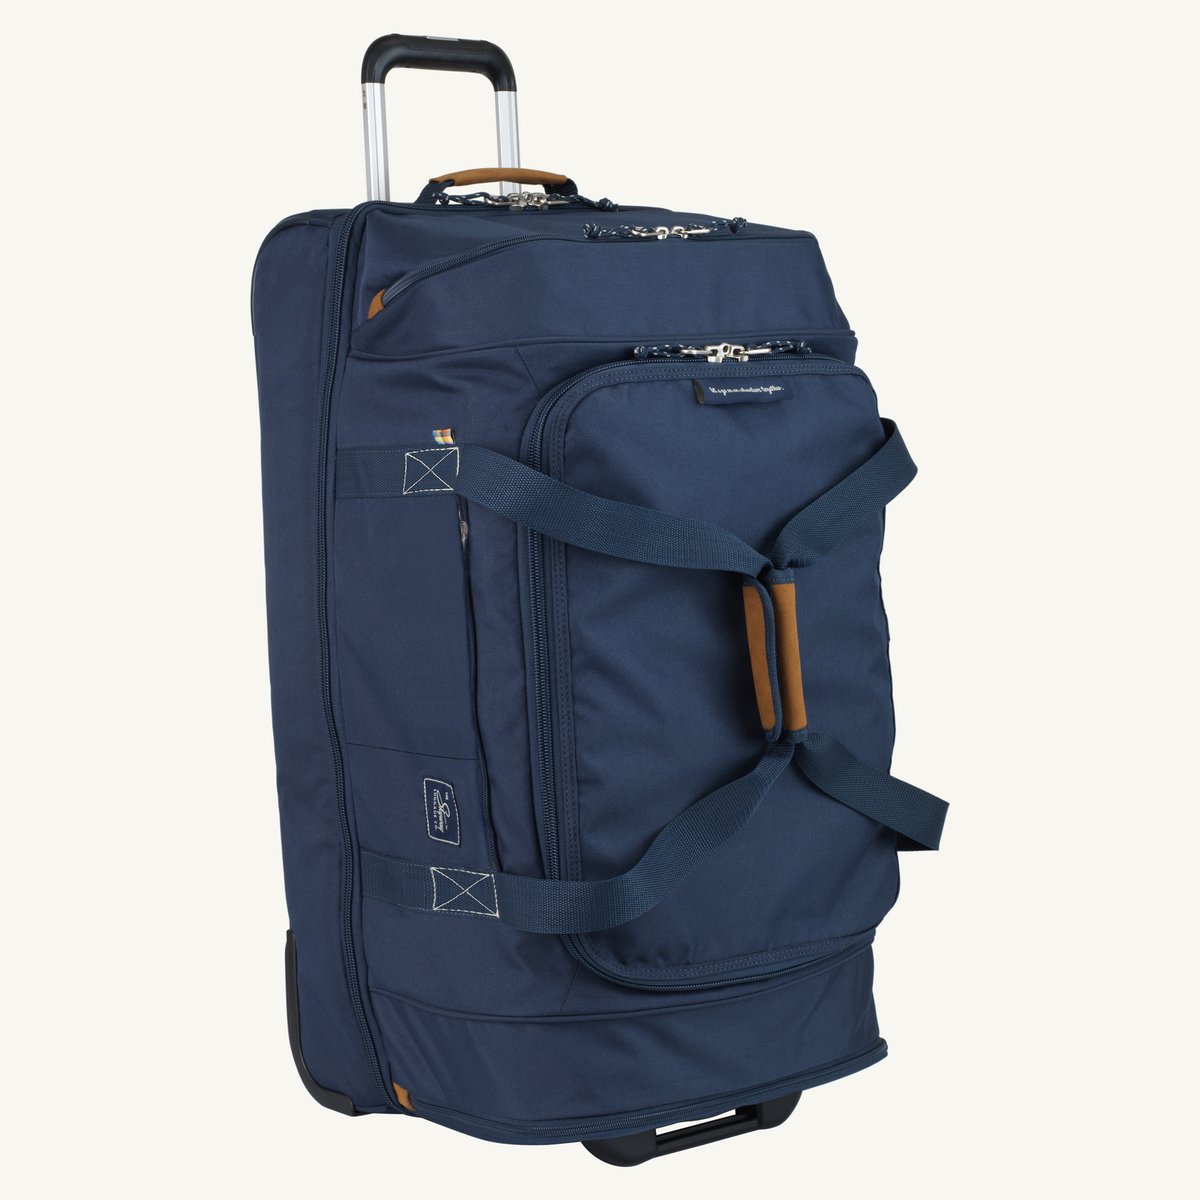 Skyway Luggage Whidbey 28